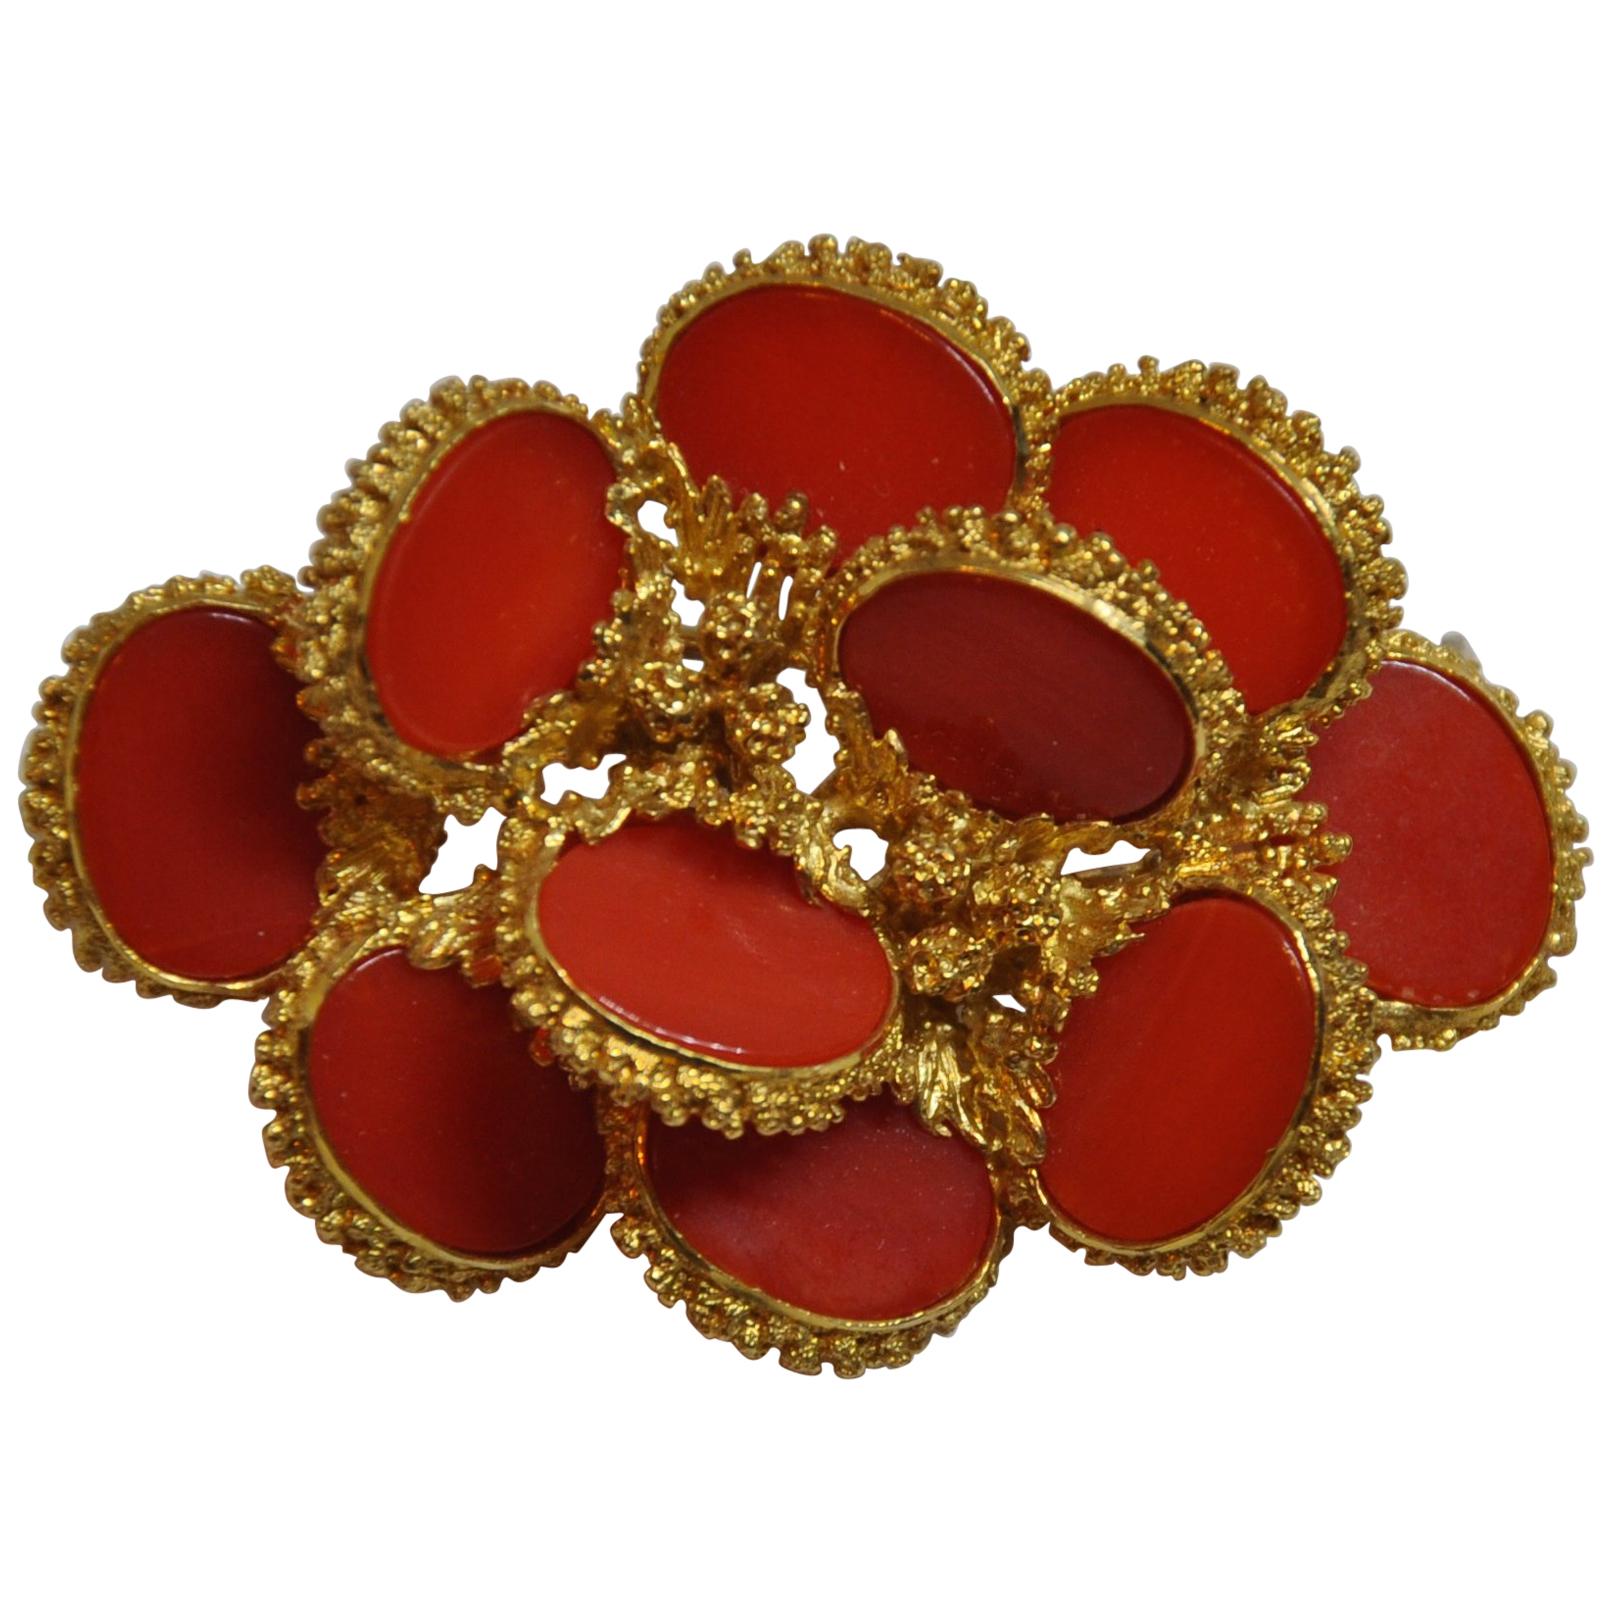 Detailed Etched 18K Yellow Gold Accented with Natural Coral Brooch/Hat Pin